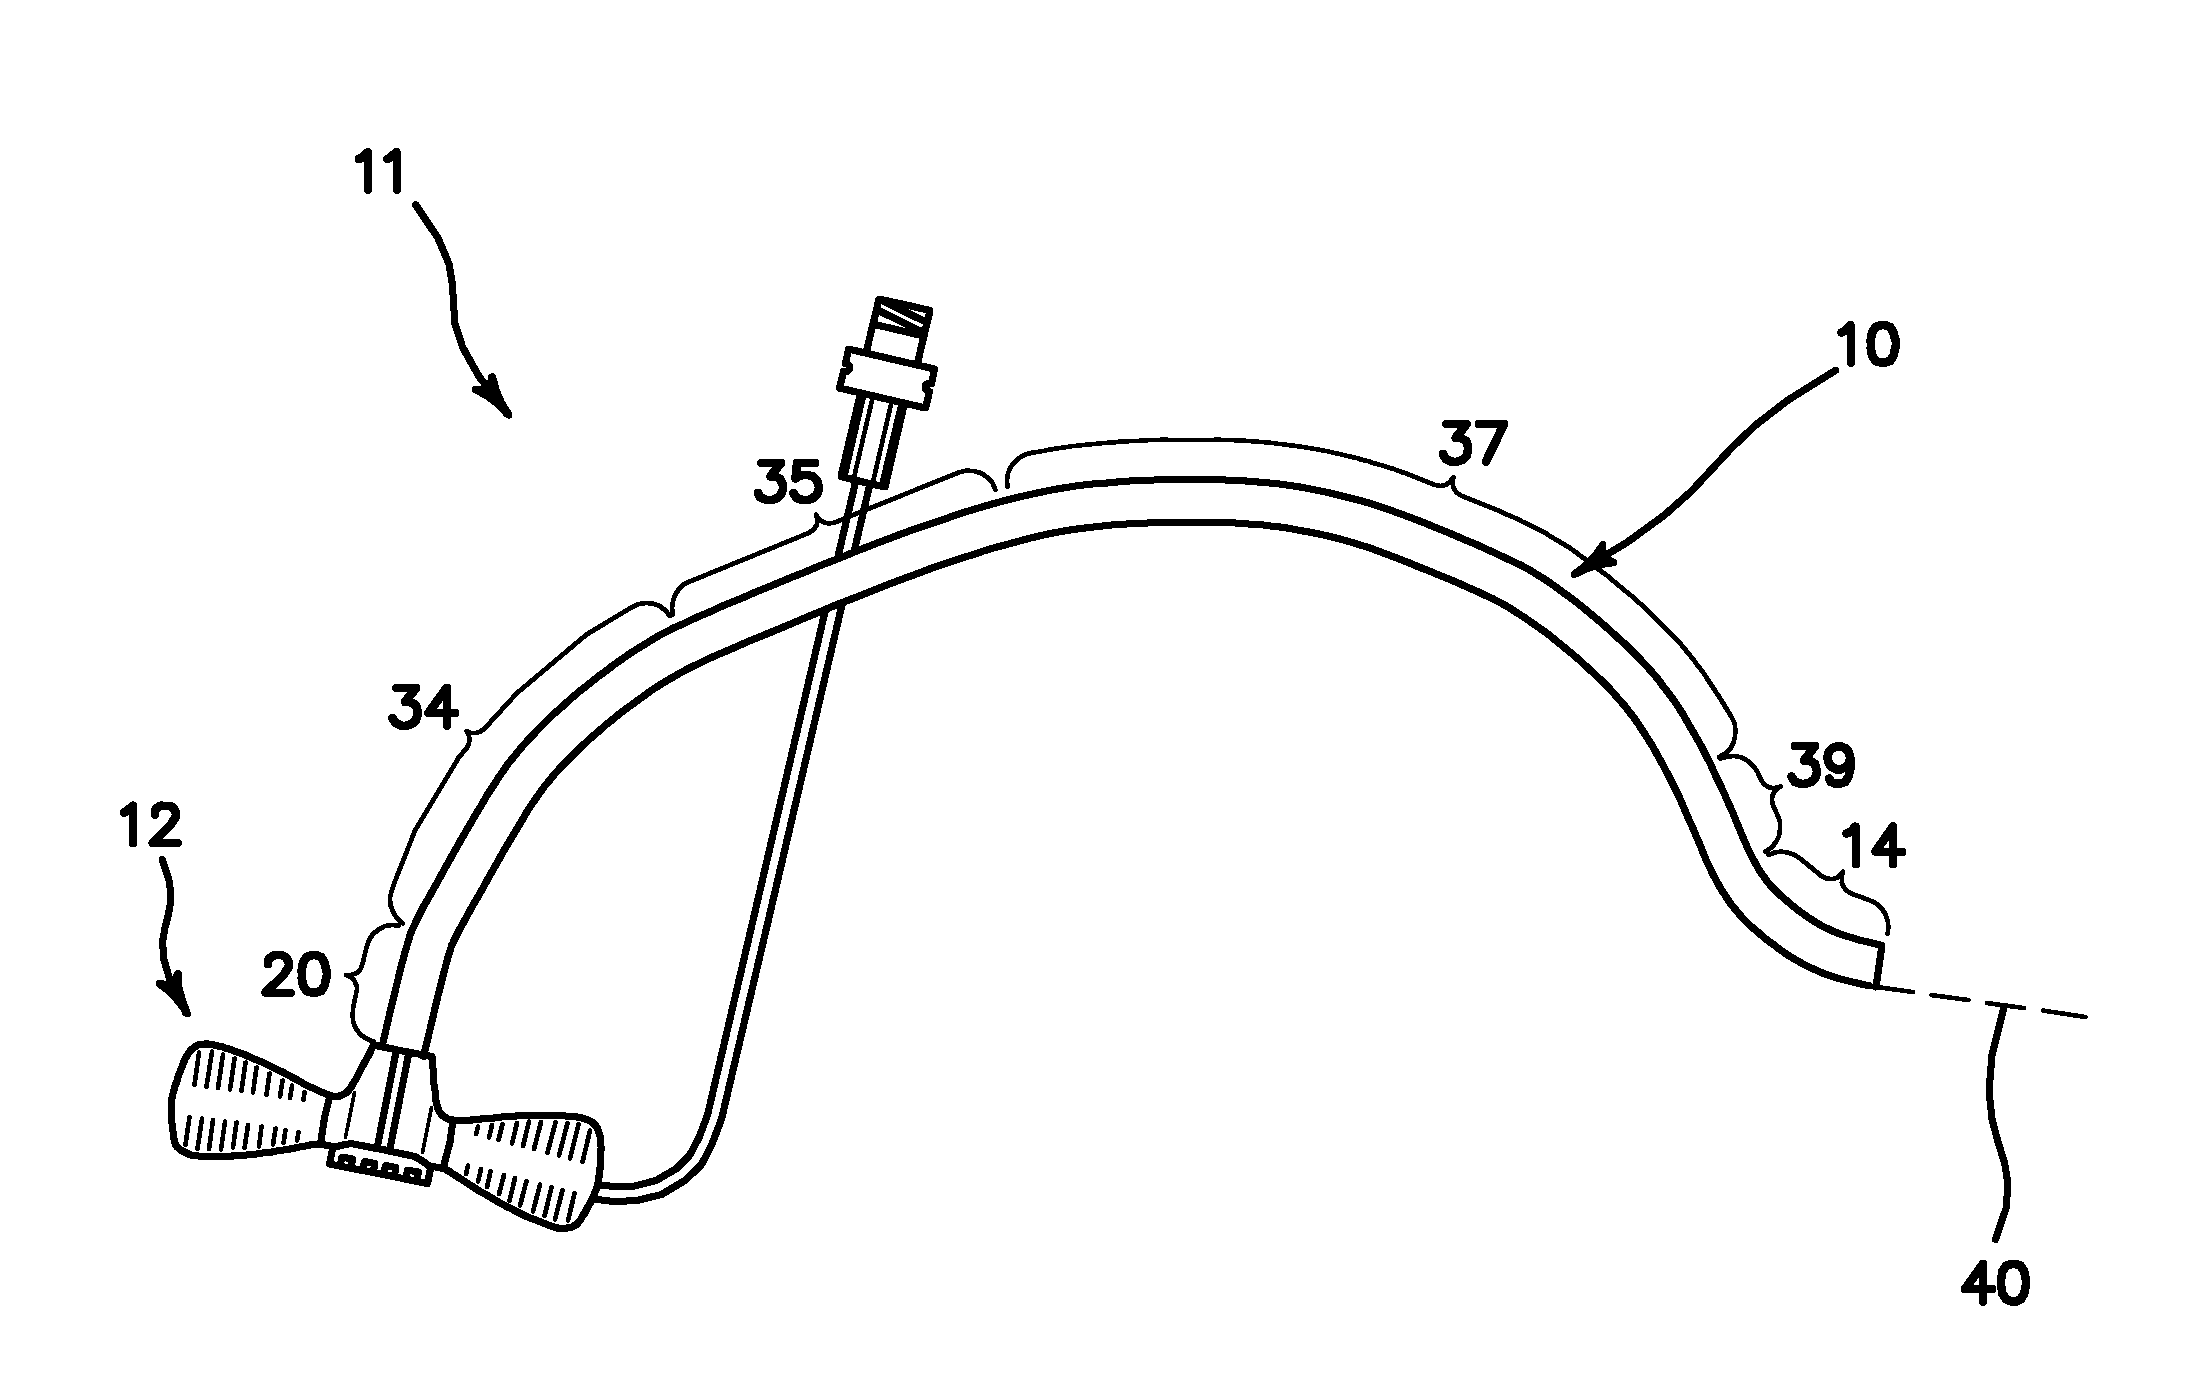 Method and Apparatus for a Right-Sided Short Sheath